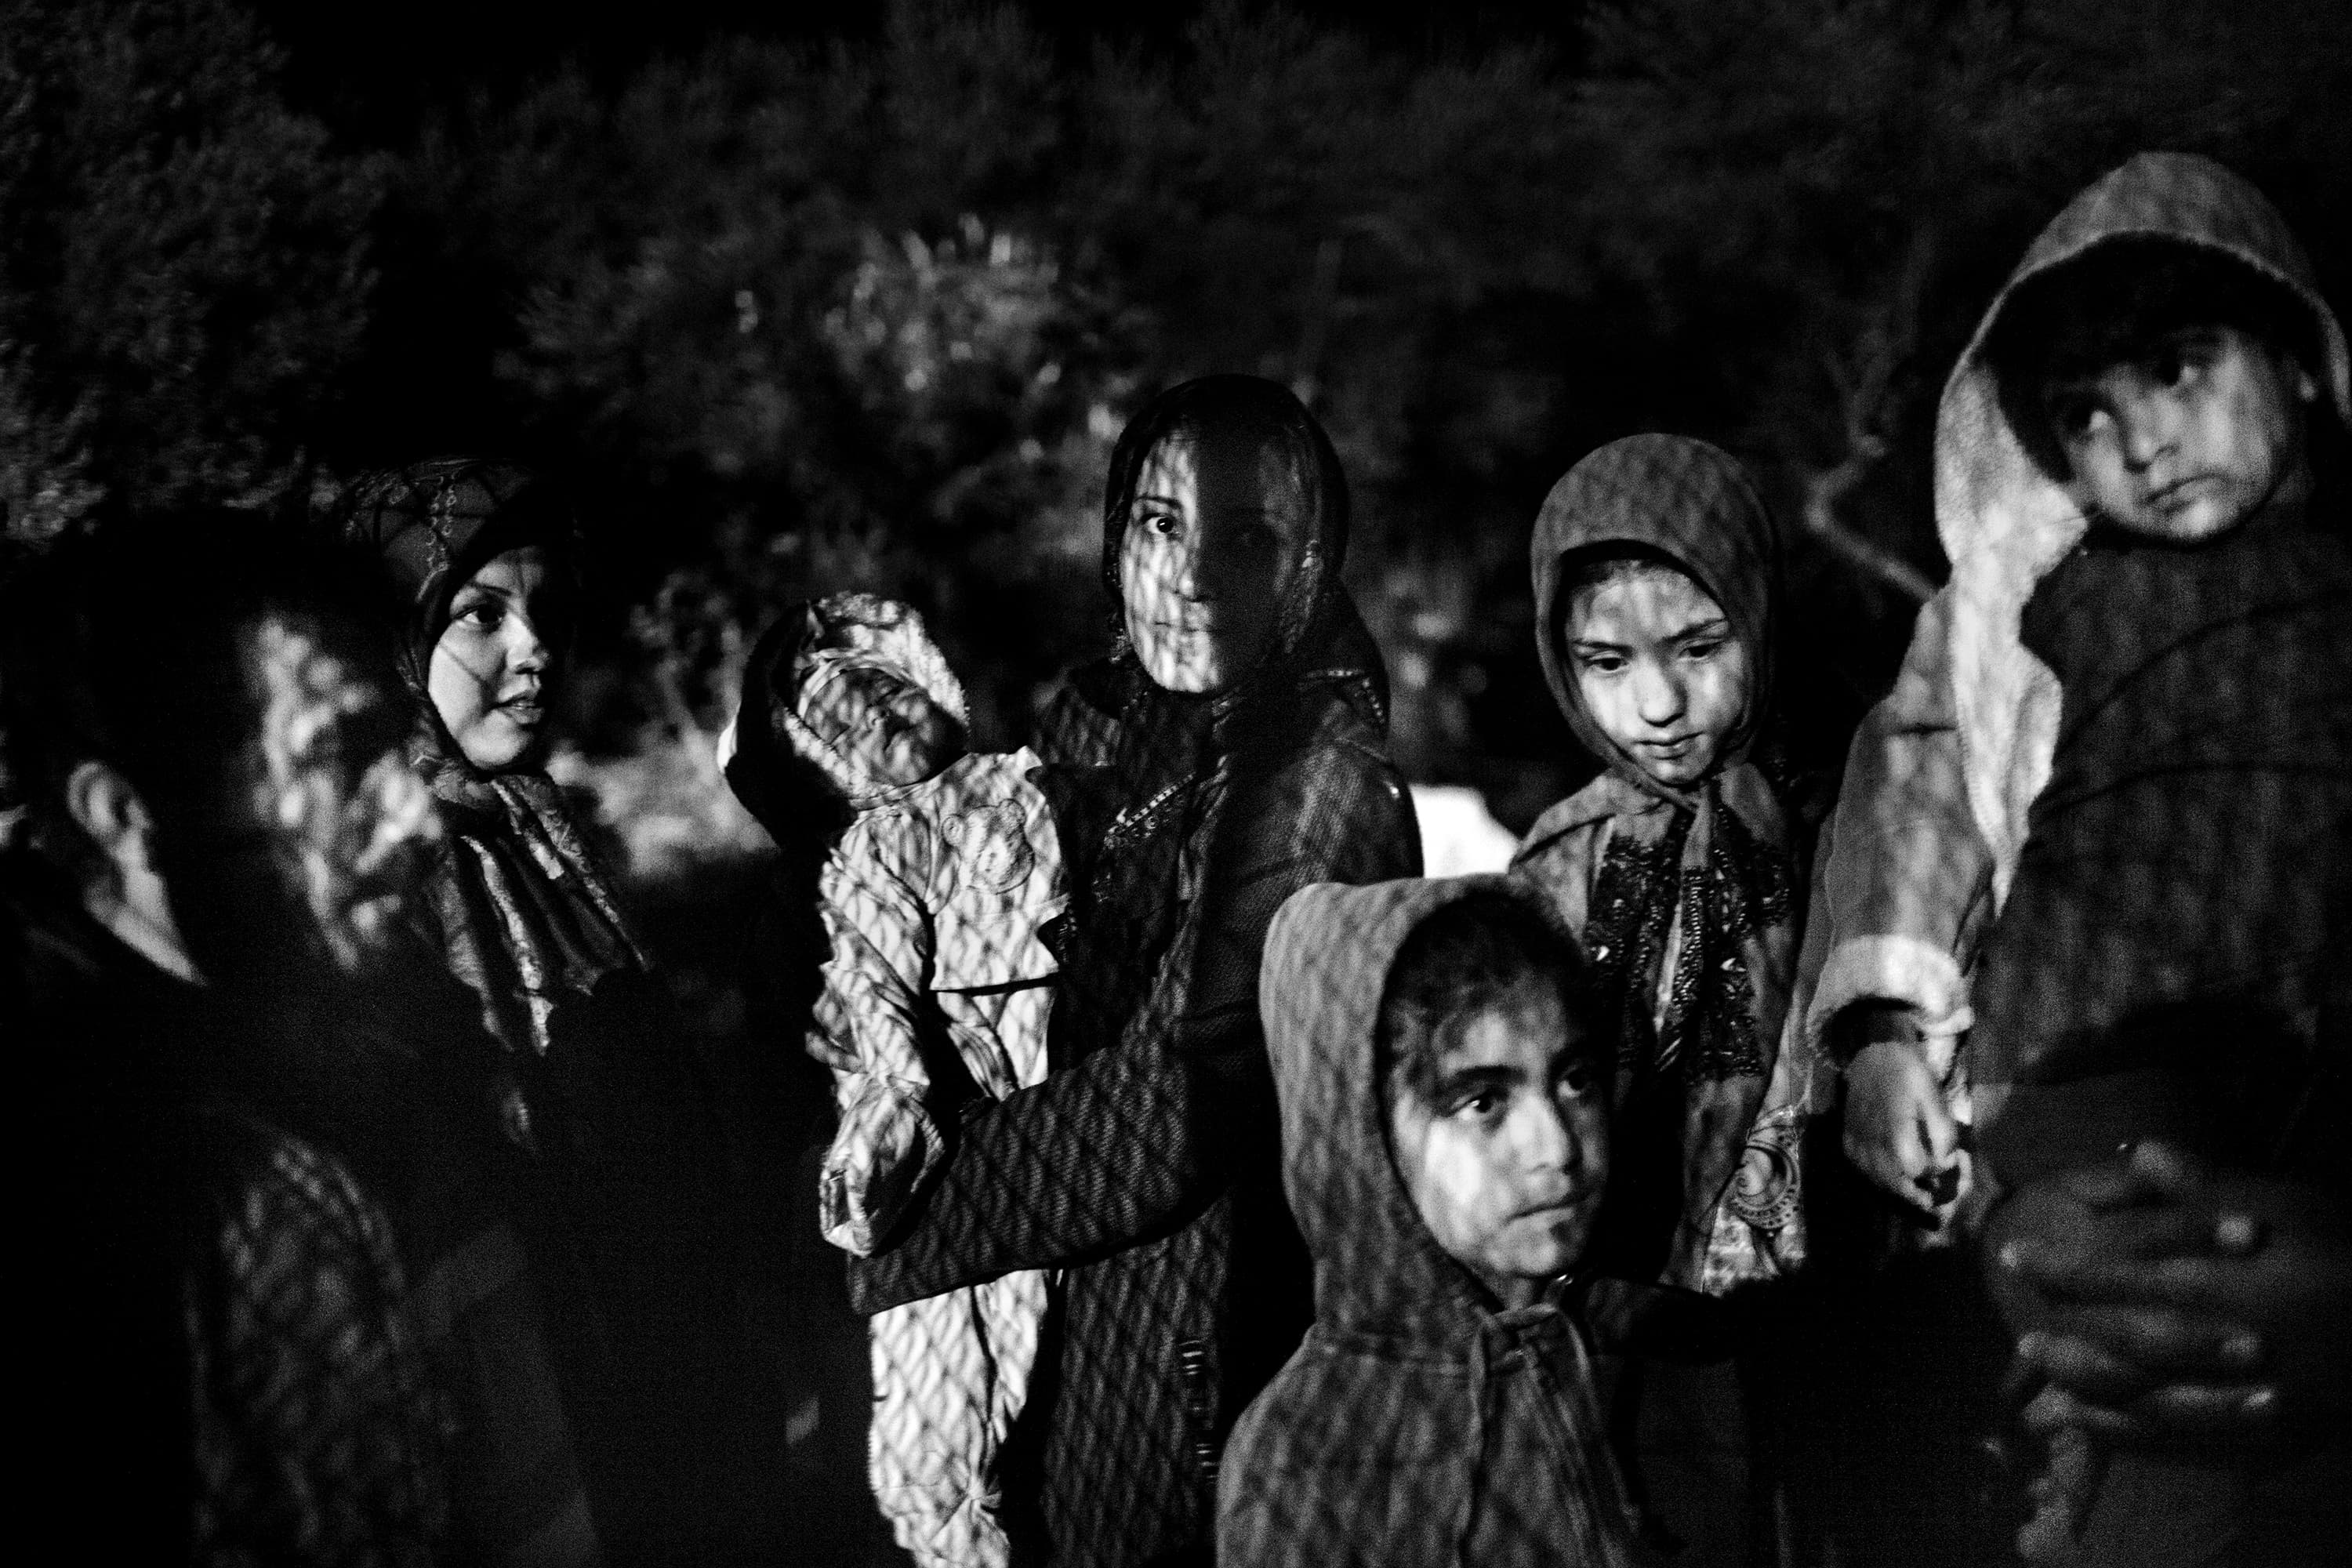 Afghan refugees wait to be registered out of Moria camp at the Greek island of Lesvos on October 12, 2015. Thousand of refugees, mostly coming from Syria, Iraq and Afghanistan, cross everyday the Aegean sea from Turkey to reach Europe: a relatively short but extremely perilous journey. According to the UN Refugee Agency, more than 850000 arrivals by sea were registered in Greece in 2015.